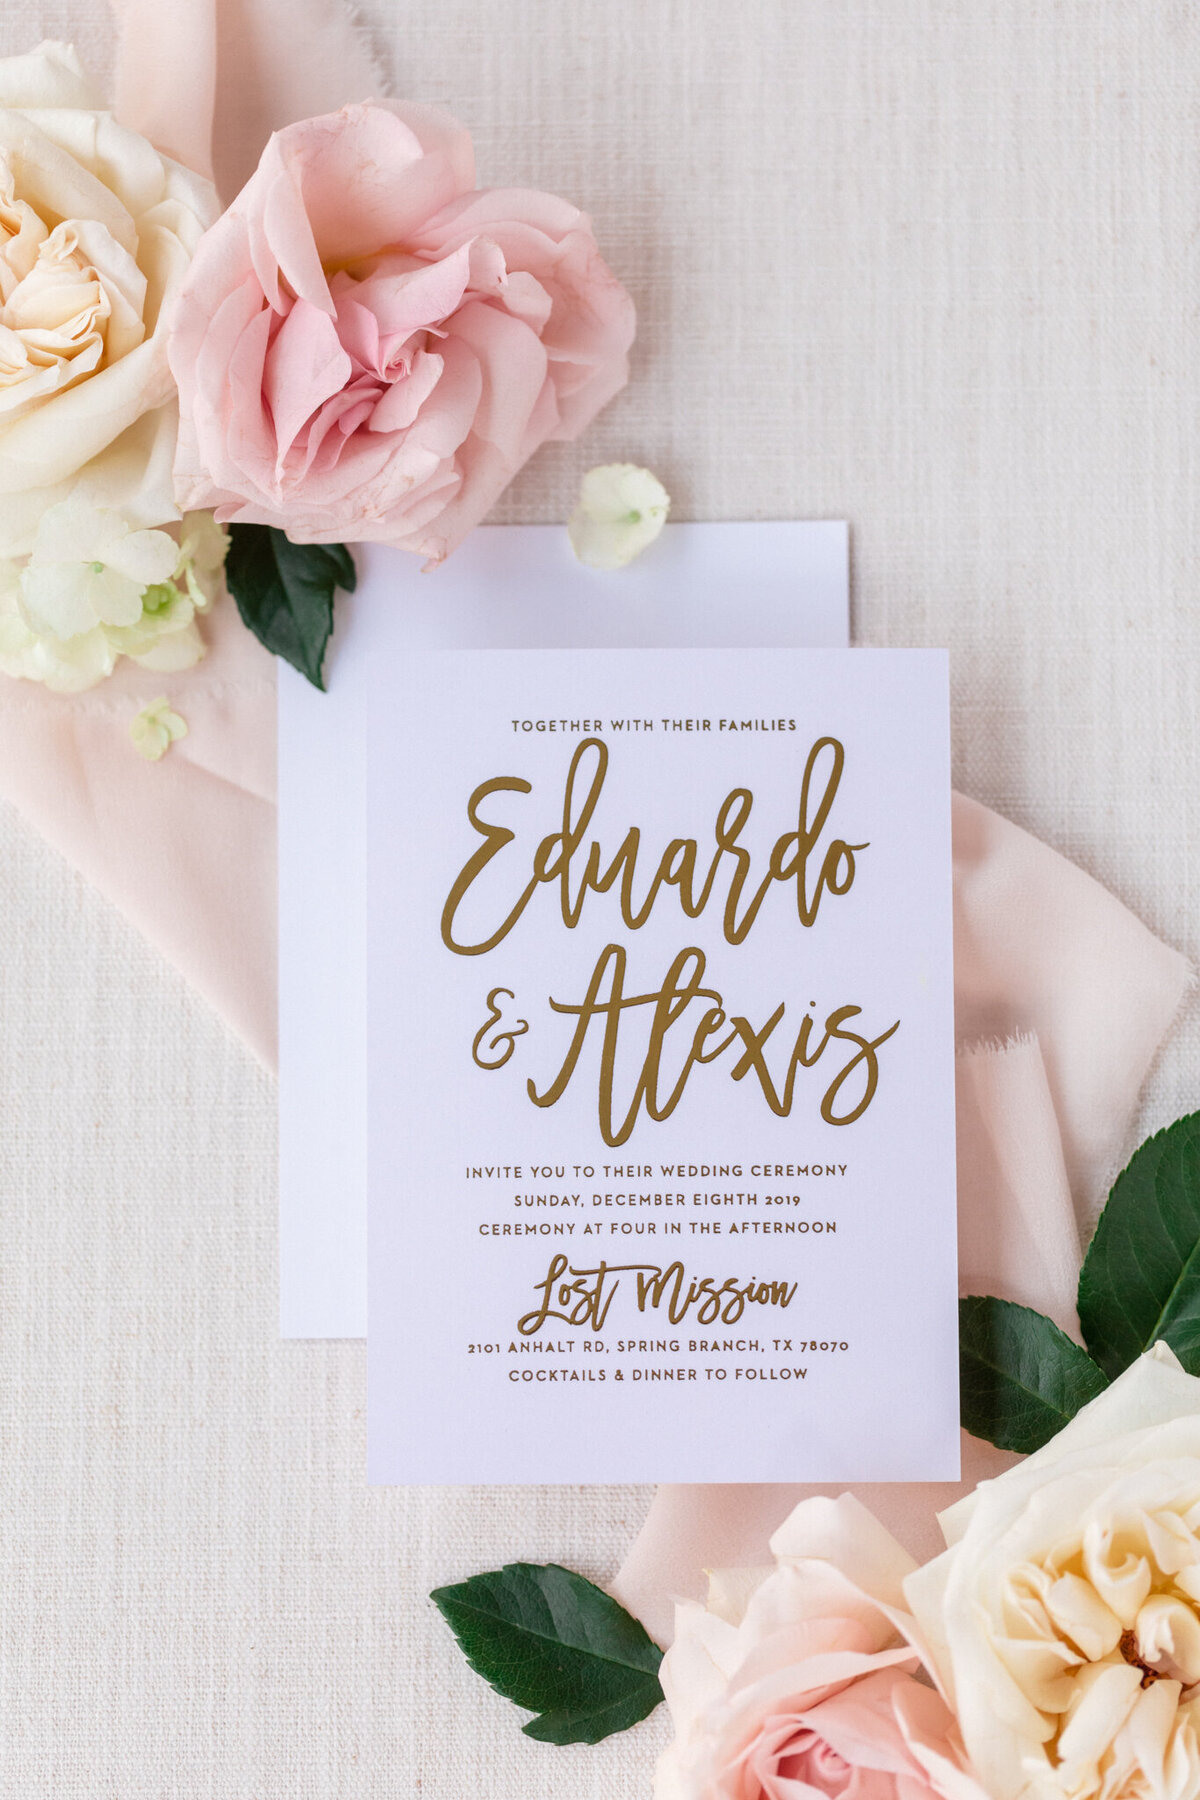 Jessica Chole Photography San Antonio Texas California Wedding Portrait Engagement Maternity Family Lifestyle Photographer Souther Cali TX CA Light Airy Bright Colorful Photography7